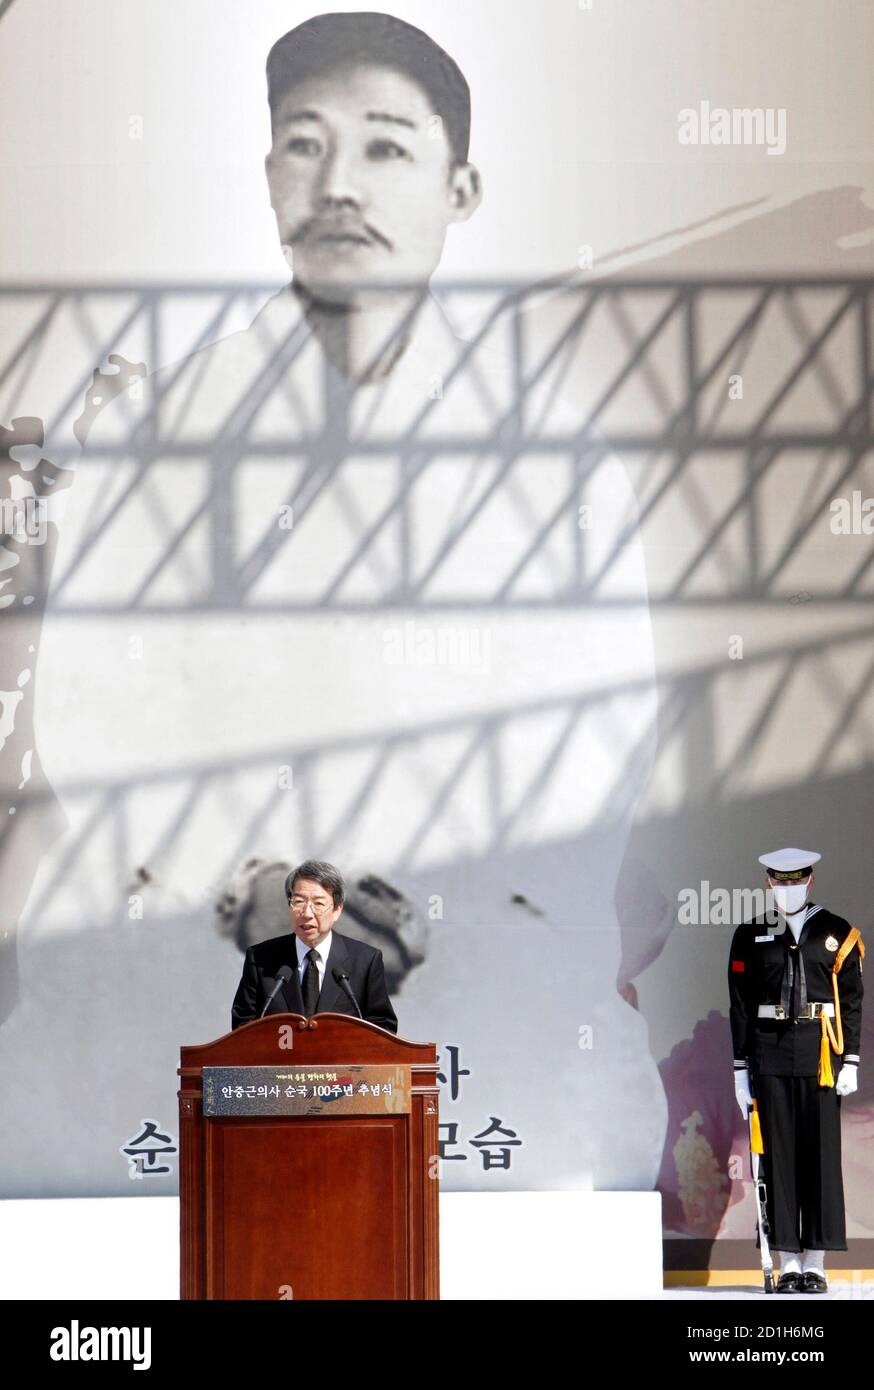 South Korean Prime Minister Chung Un-chan delivers a speech during a ceremony at the Seoul City Hall Plaza March 26, 2010, to commemorate the 100th anniversary of Japan's execution of Korean independence fighter Ahn Jung-geun. Ahn was the man who shot to death Hirobumi Ito, the first Japanese Resident General of Korea, in China's northeastern city of Harbin in October 1909. Japan had forcibly occupied and colonized the Korean peninsula in 1910-1945.     REUTERS/Jo Yong-Hak (SOUTH KOREA - Tags: ANNIVERSARY POLITICS) Stock Photo